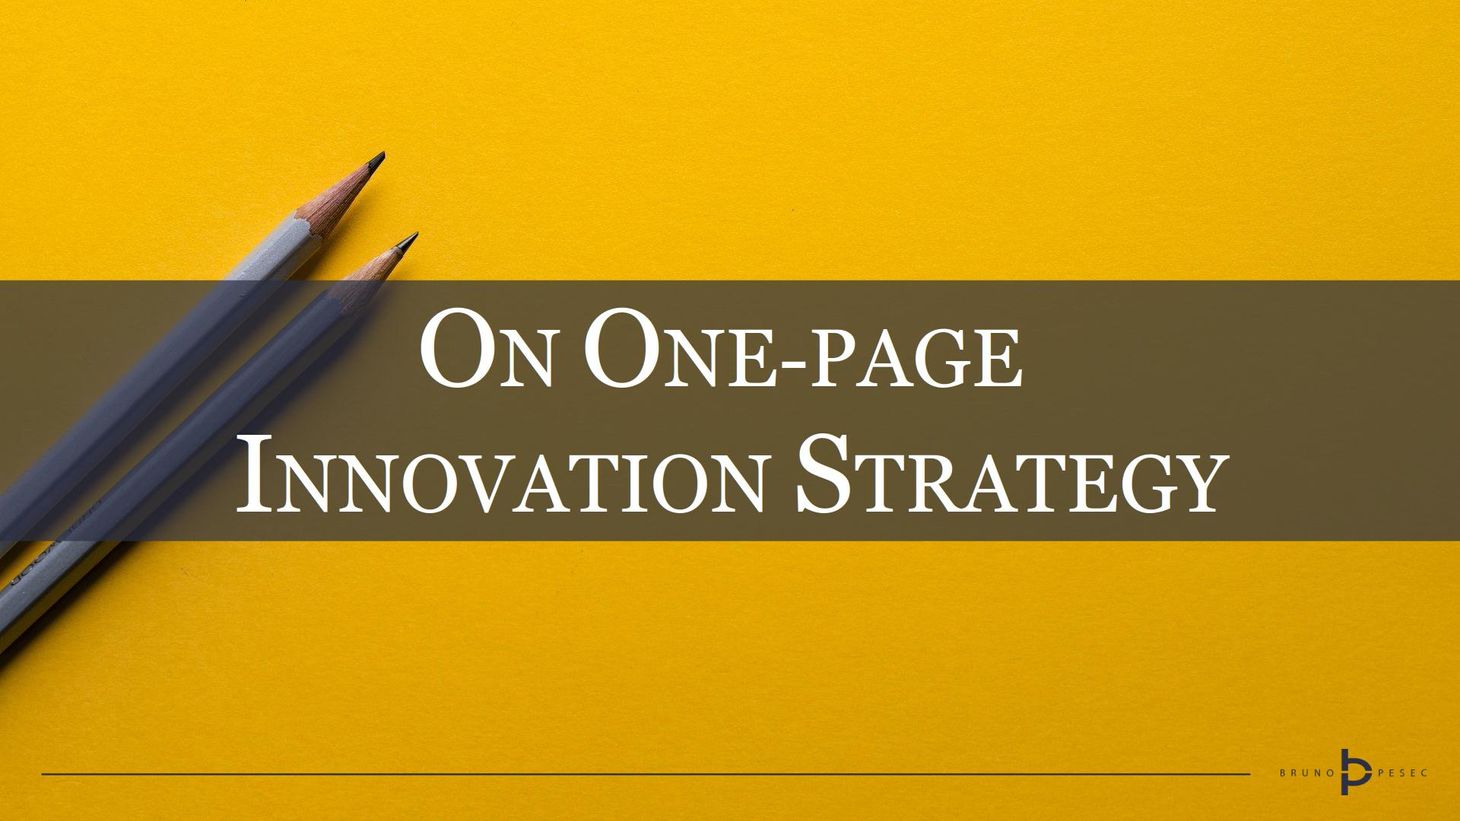 On one-page innovation strategy